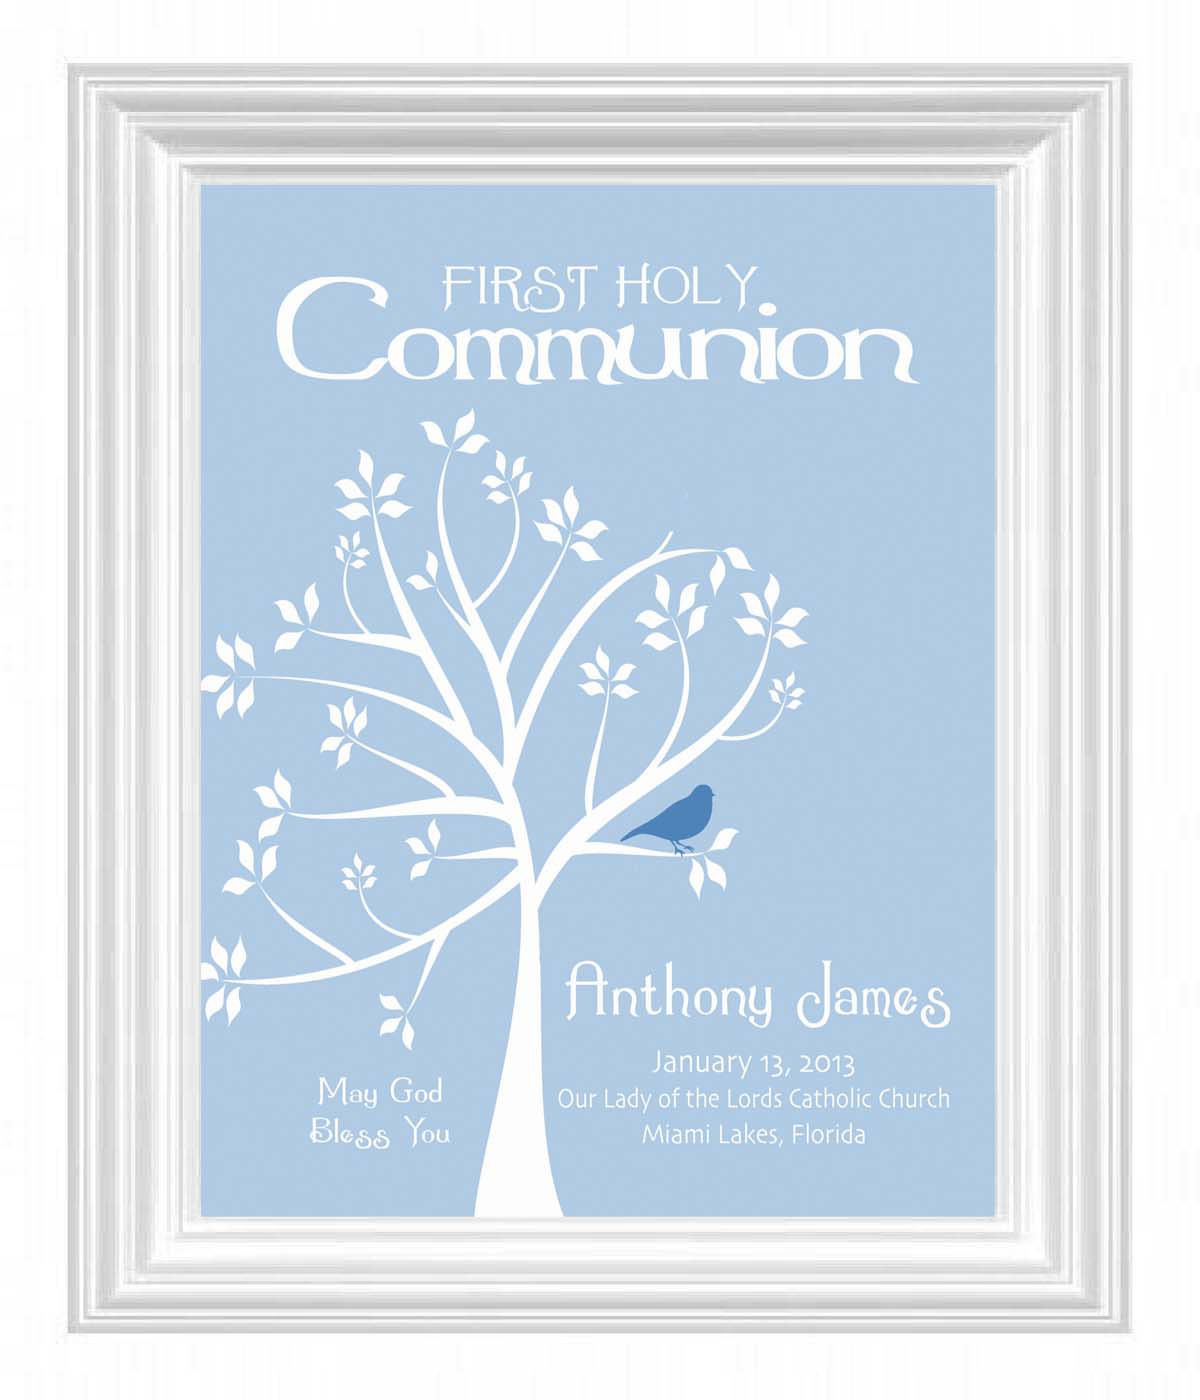 Boys First Communion Gift Ideas
 munion Personalized Gift First Holy munion Print Boys